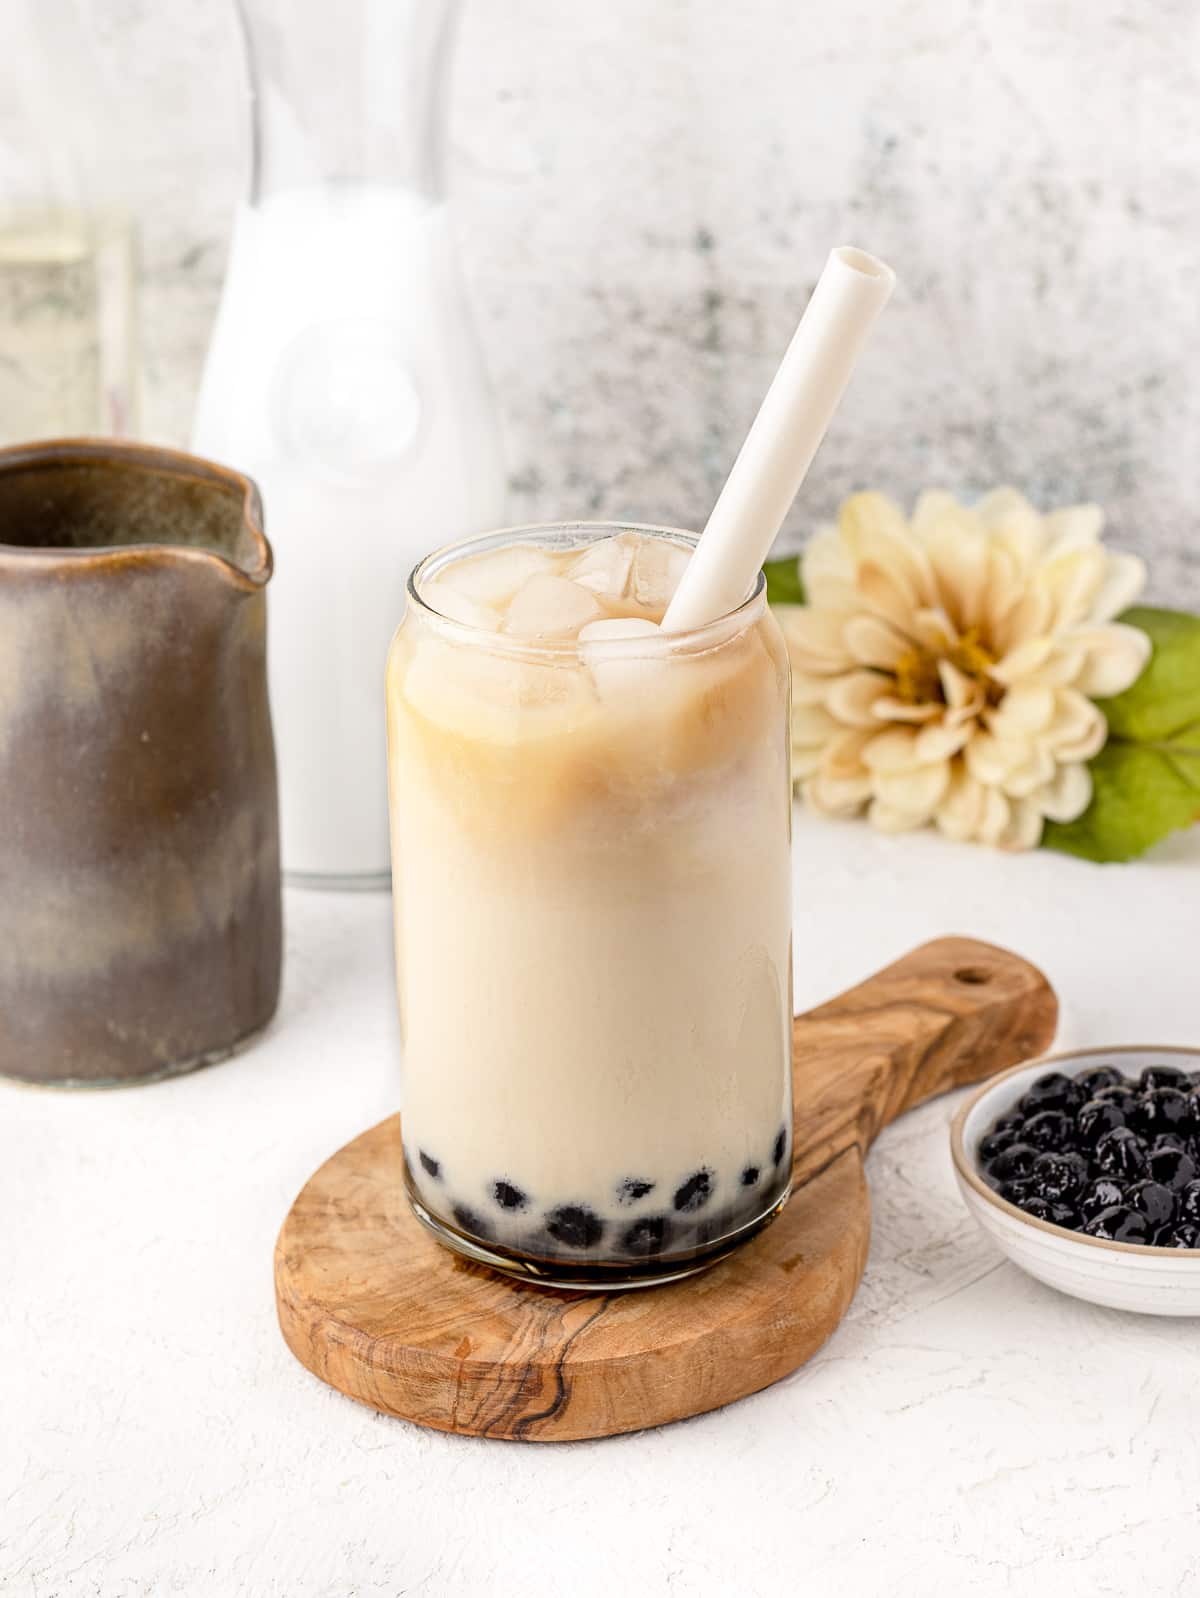 Earl Grey Milk Tea with boba. More bobas on the side, half and half in a jar, tea in a little pot, and a beige flower.